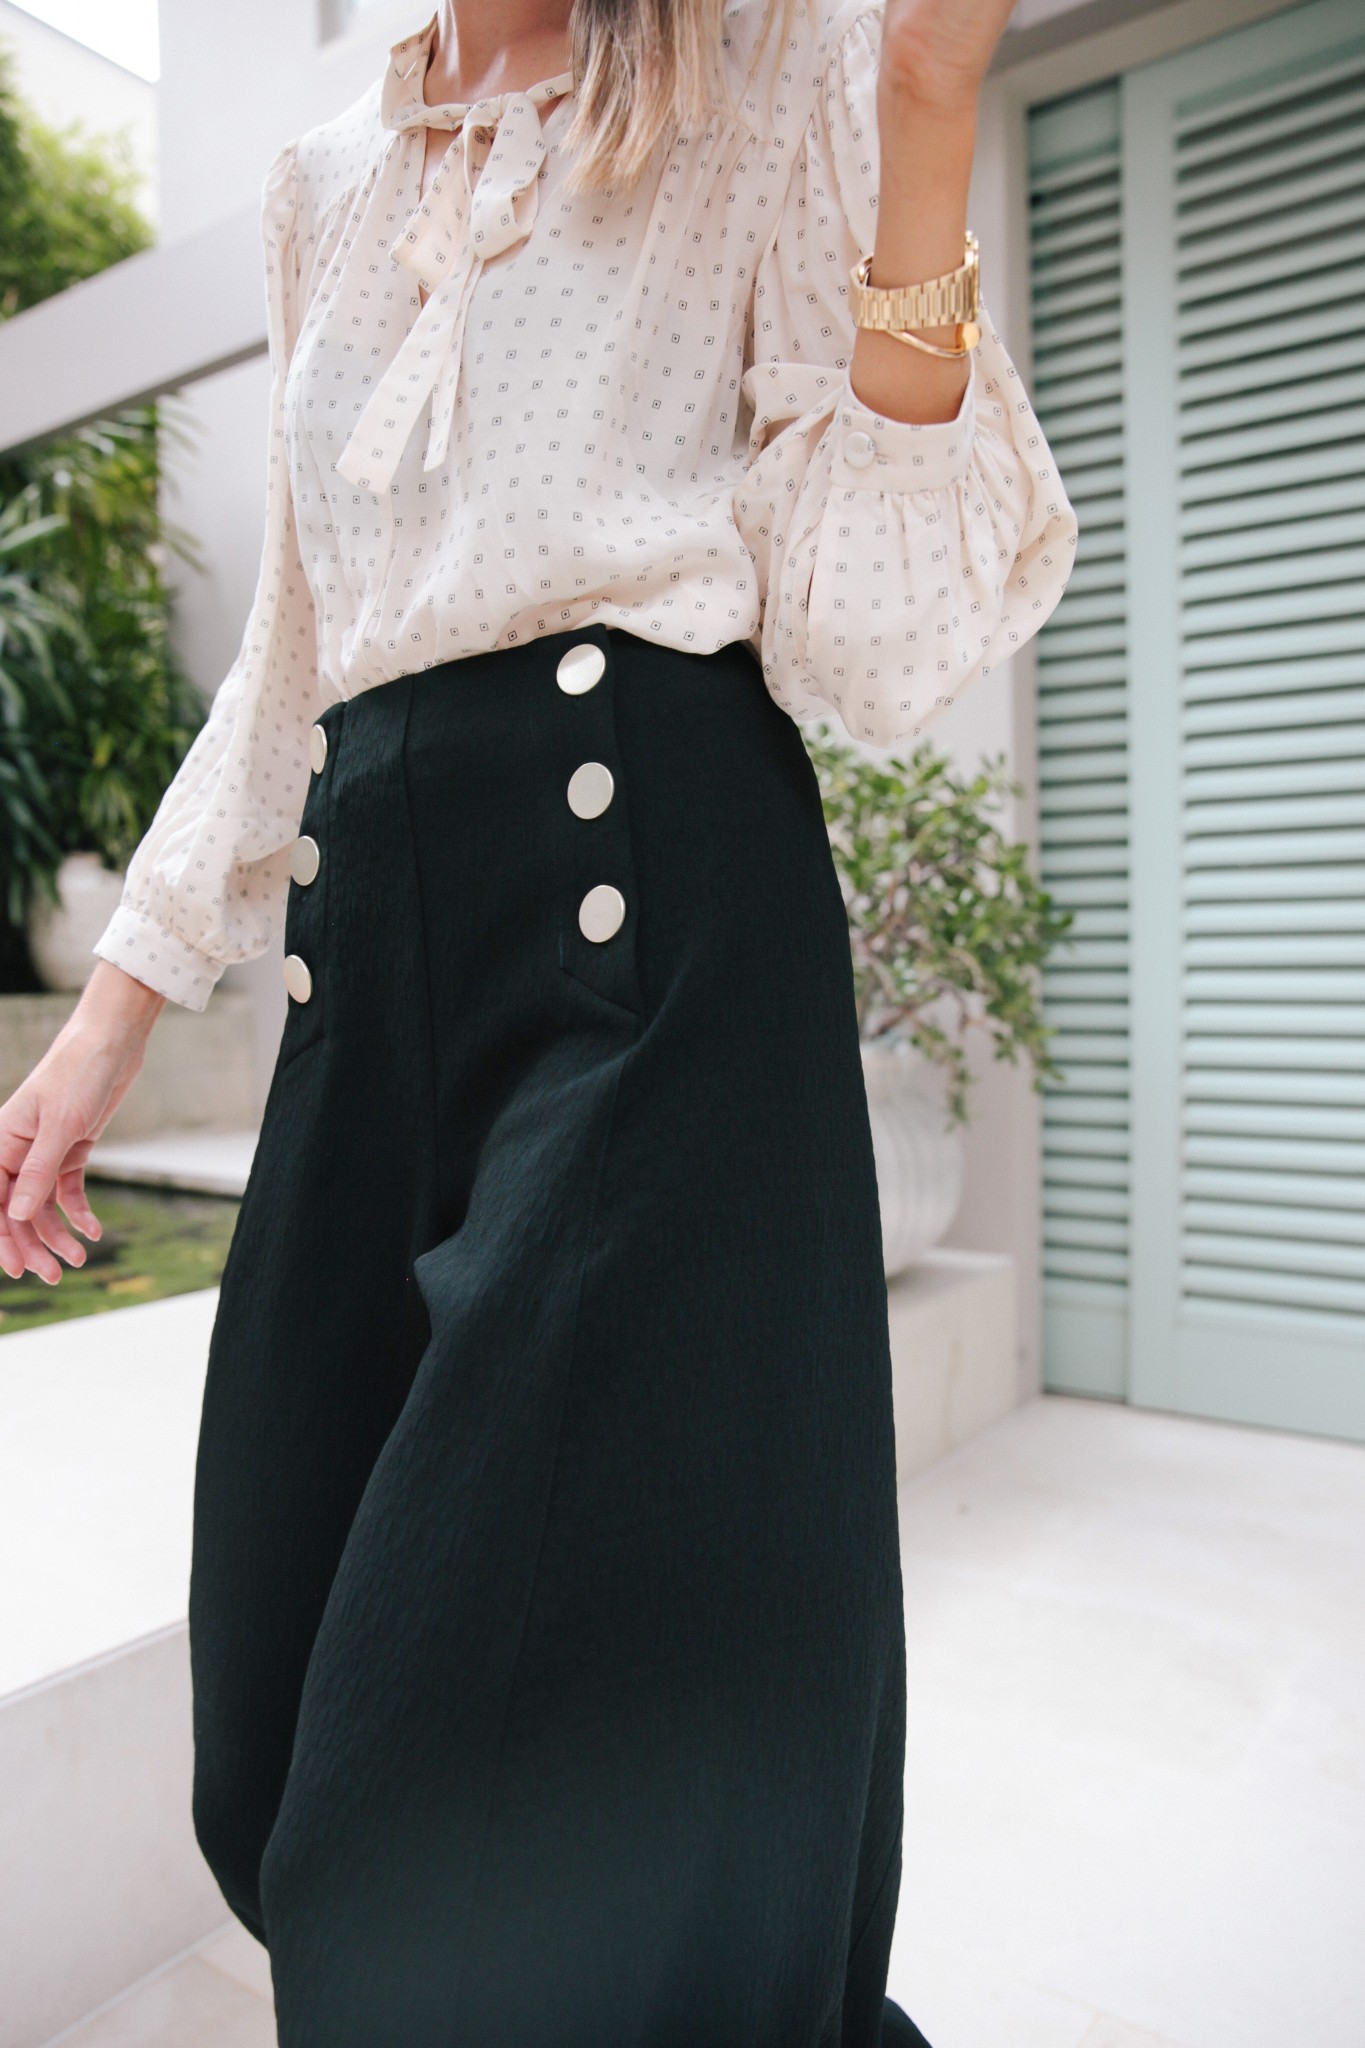 What Shoes to Wear With Wide Leg Pants? Guide on Choosing the